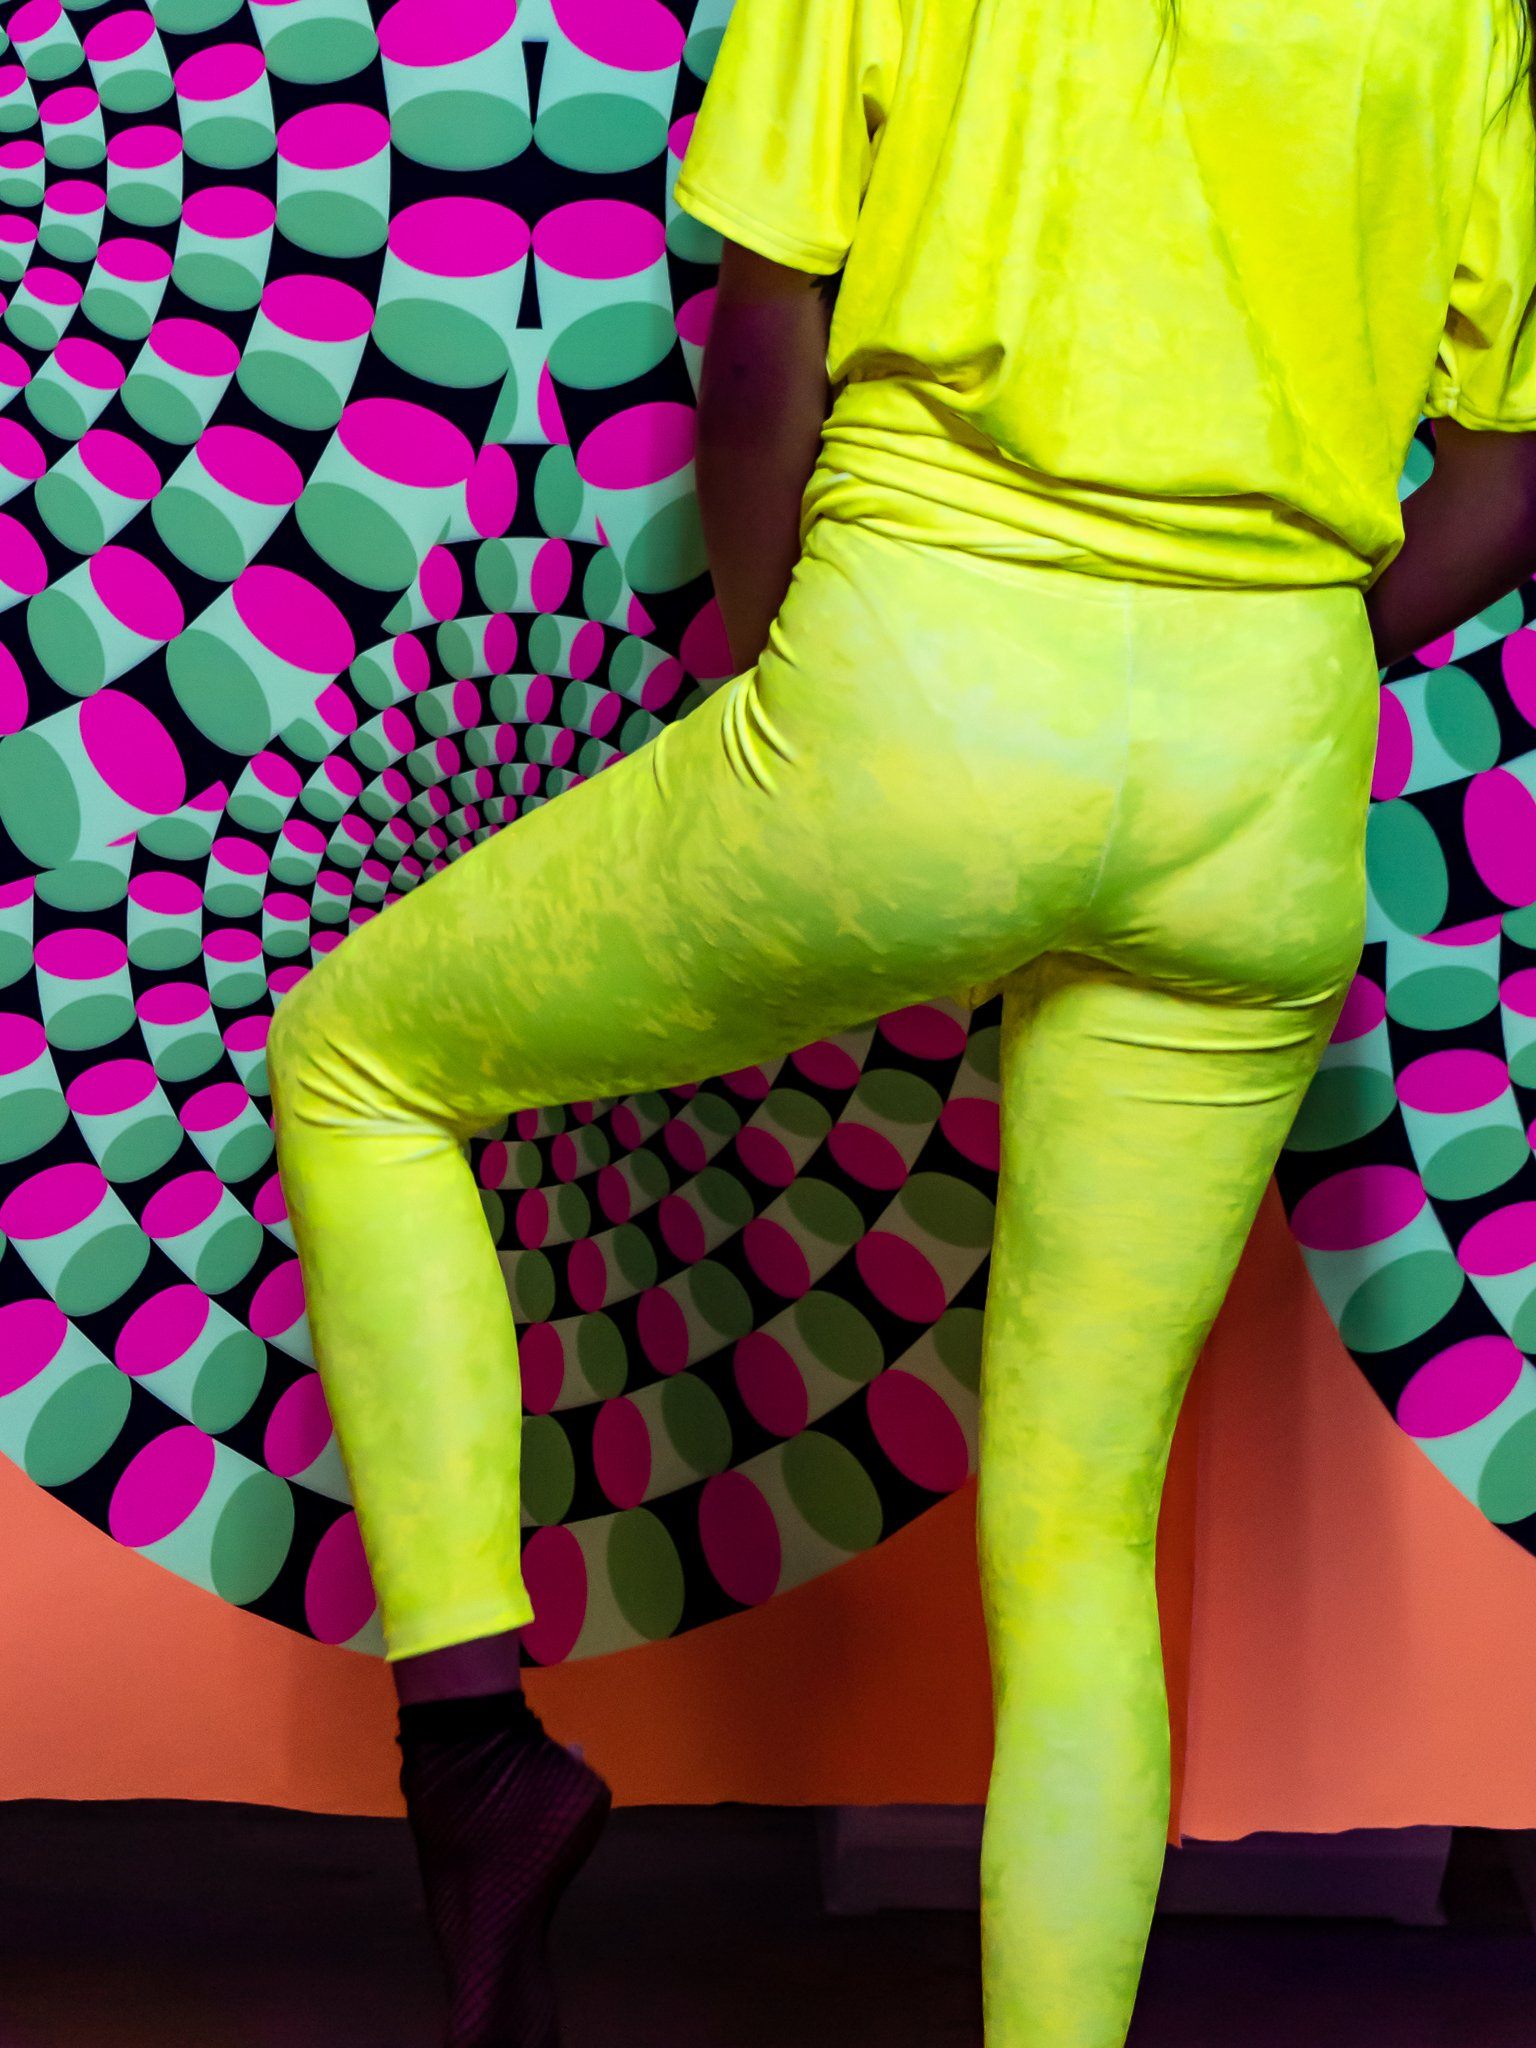 Neon Tights - Electro Threads